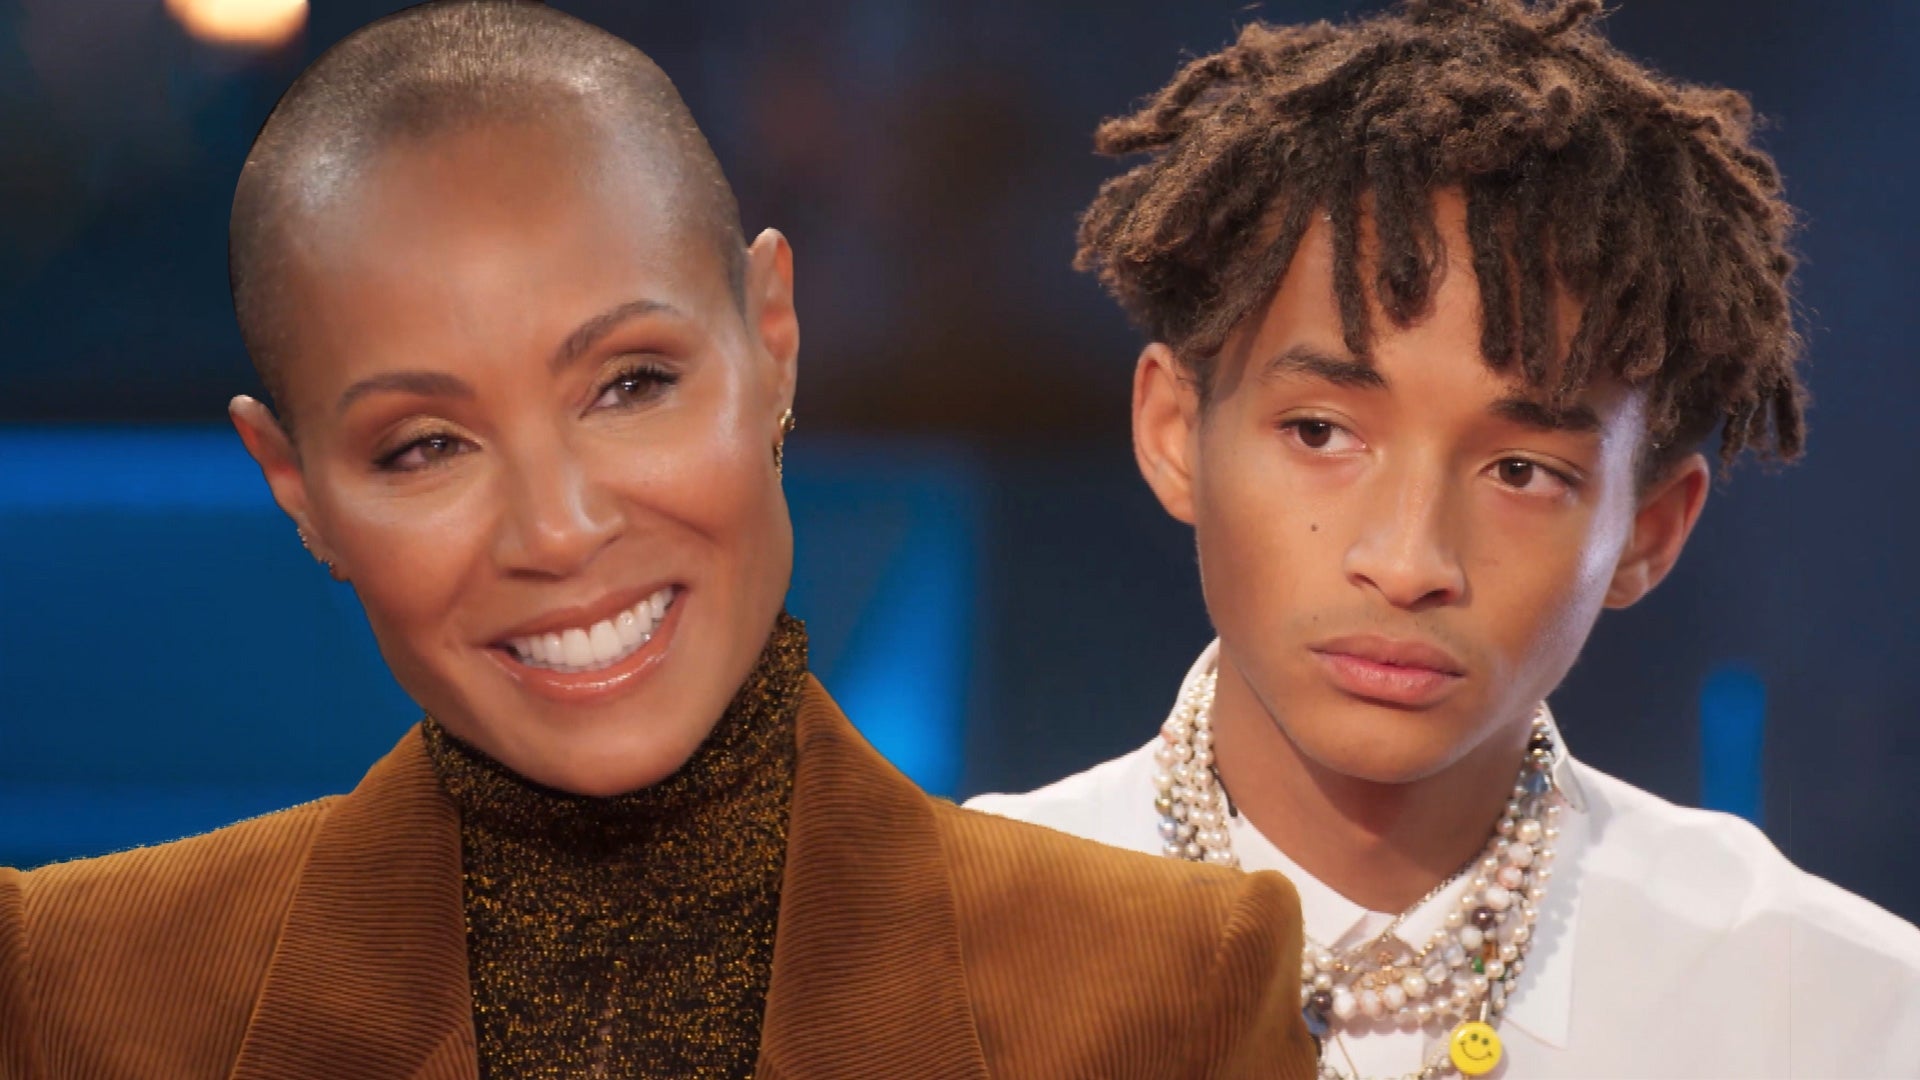 Jaden Smith: I've Gained 10 Lbs Since Family Intervention